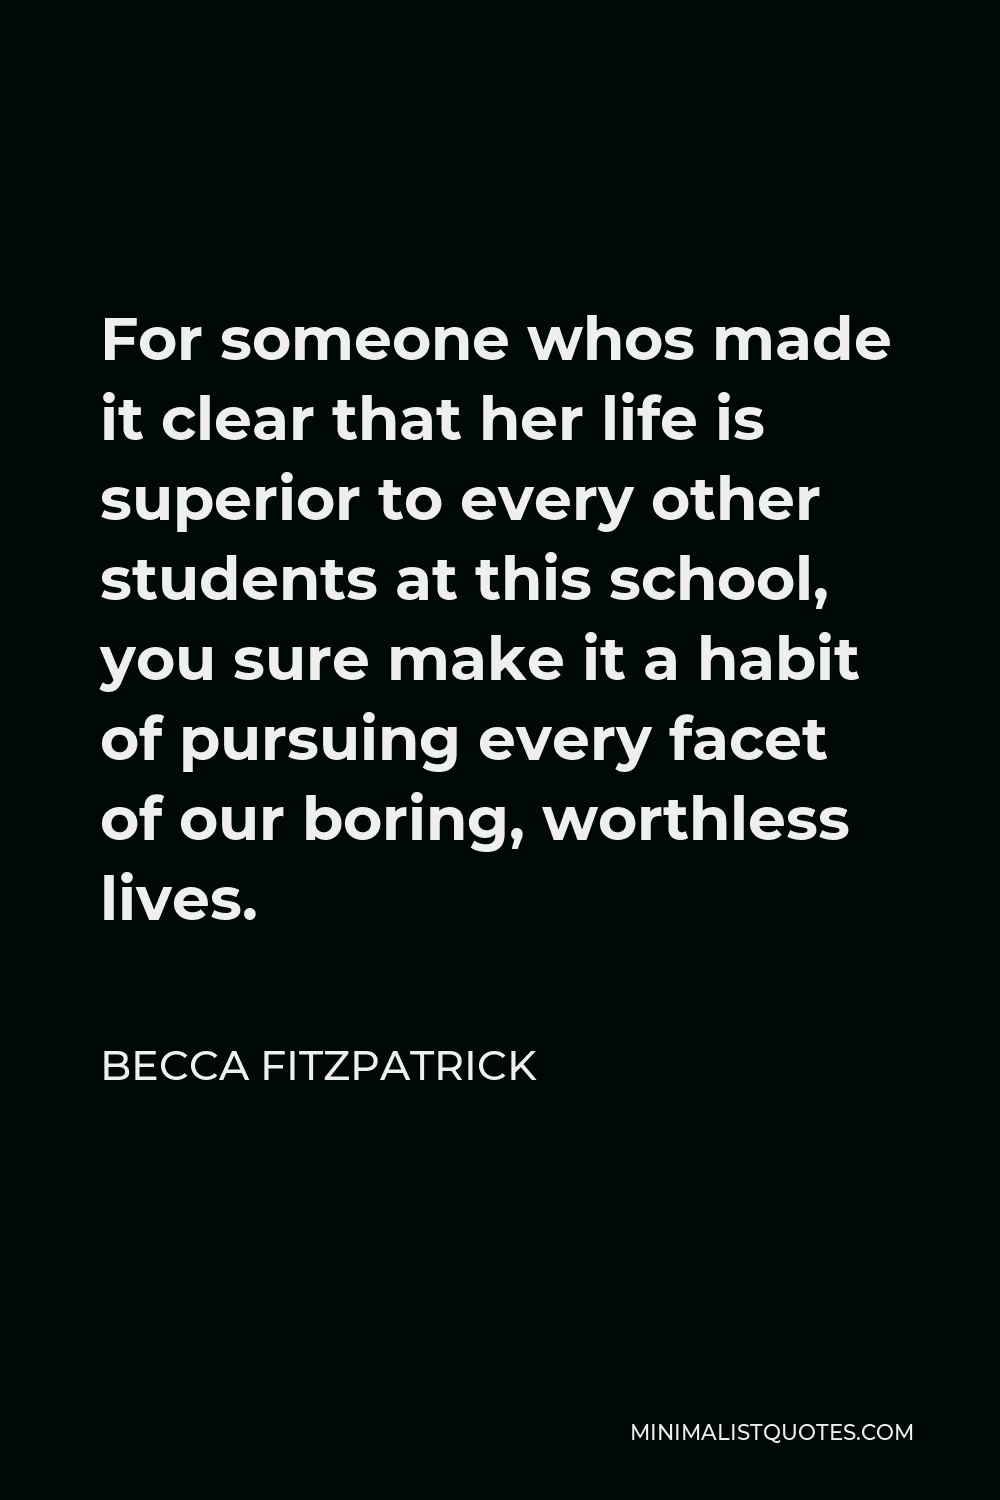 Becca Fitzpatrick Quote - For someone whos made it clear that her life is superior to every other students at this school, you sure make it a habit of pursuing every facet of our boring, worthless lives.